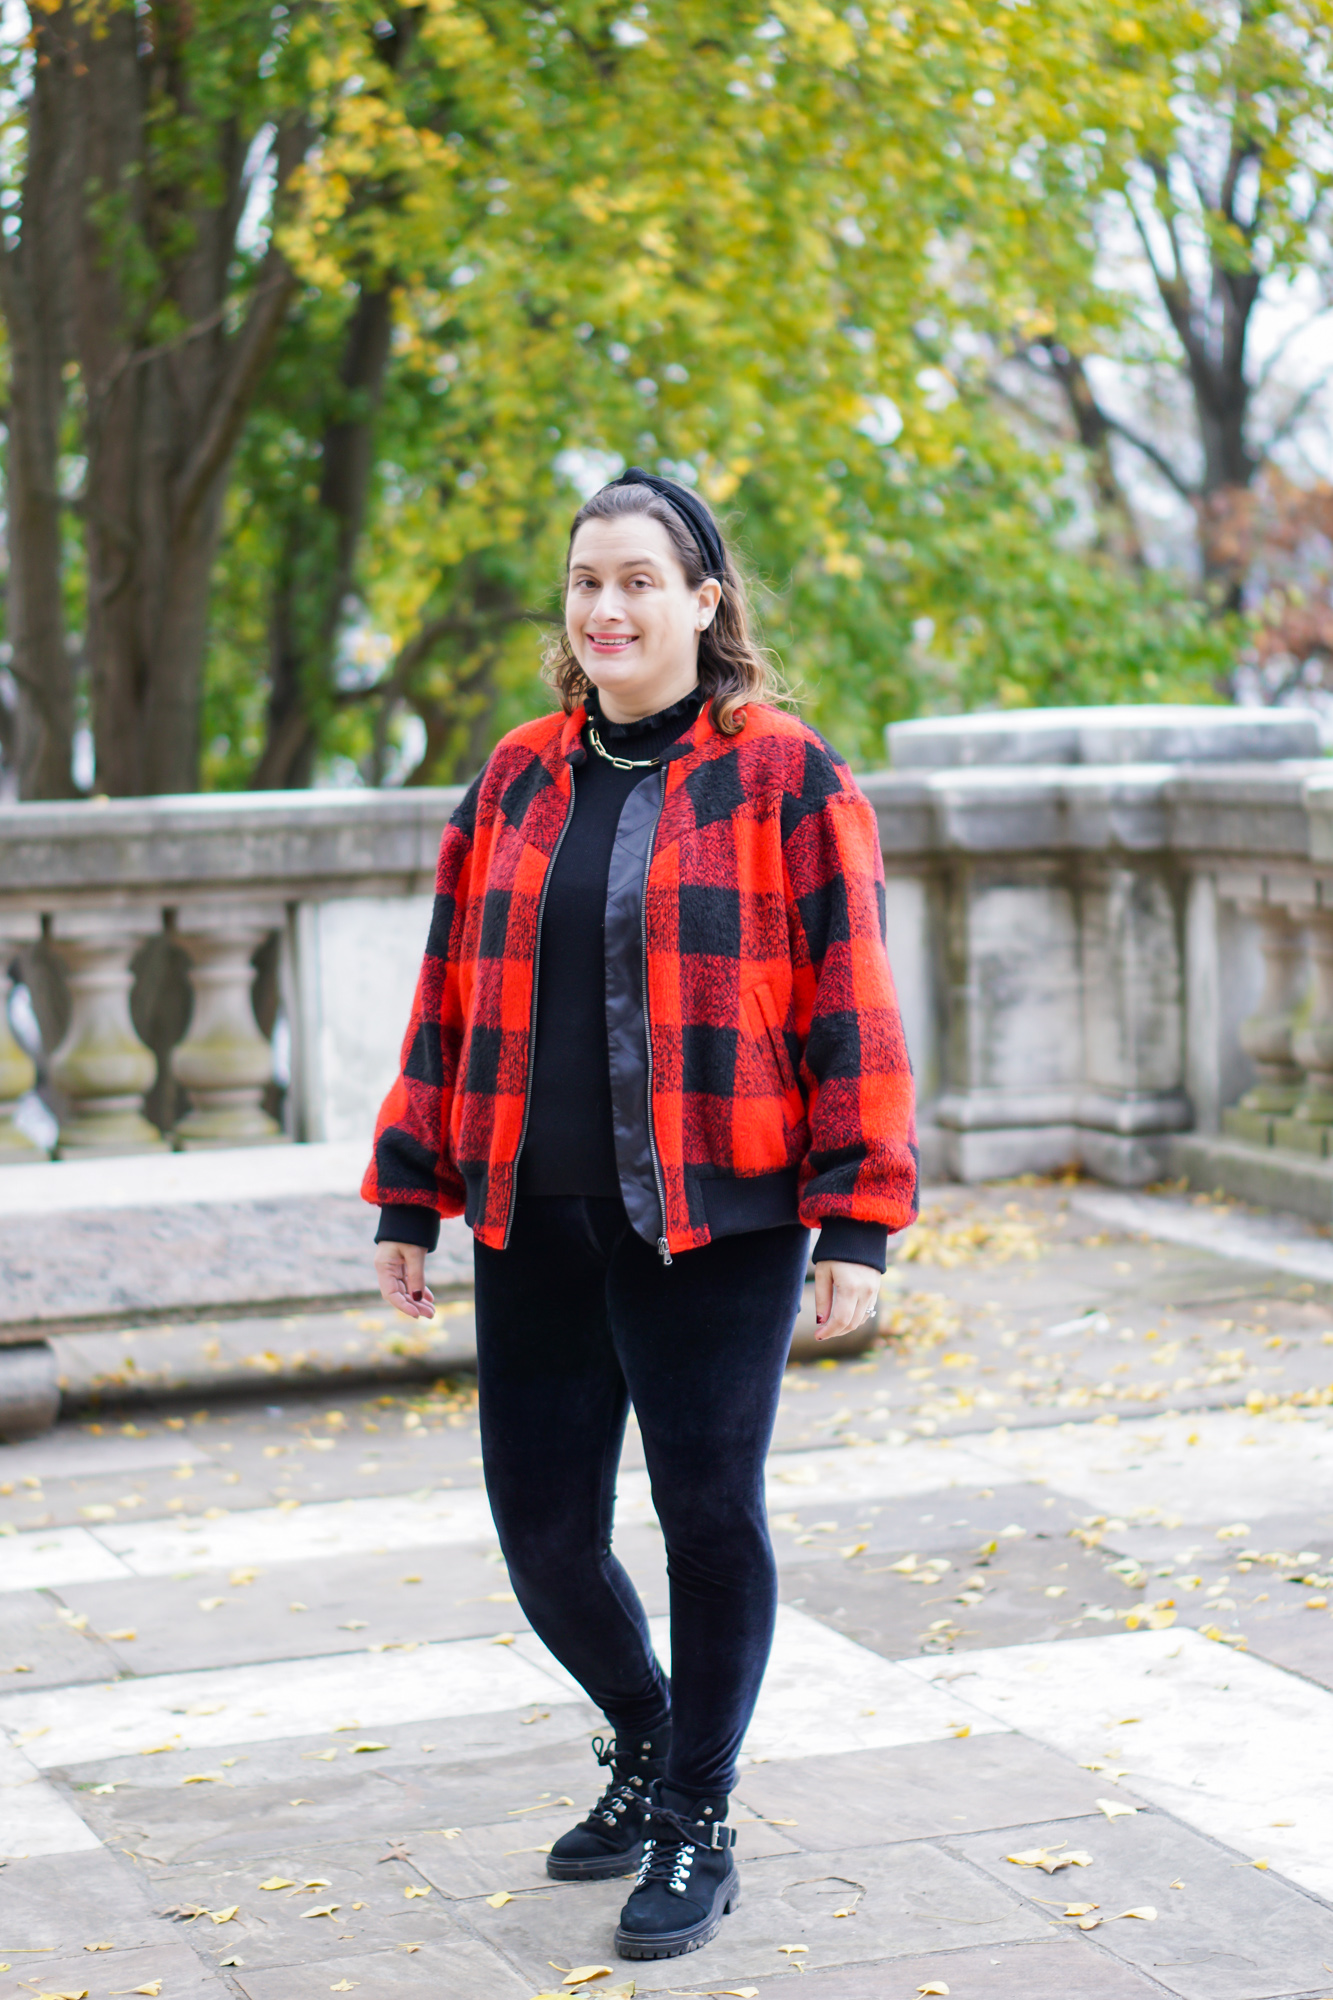 How to wear plaid